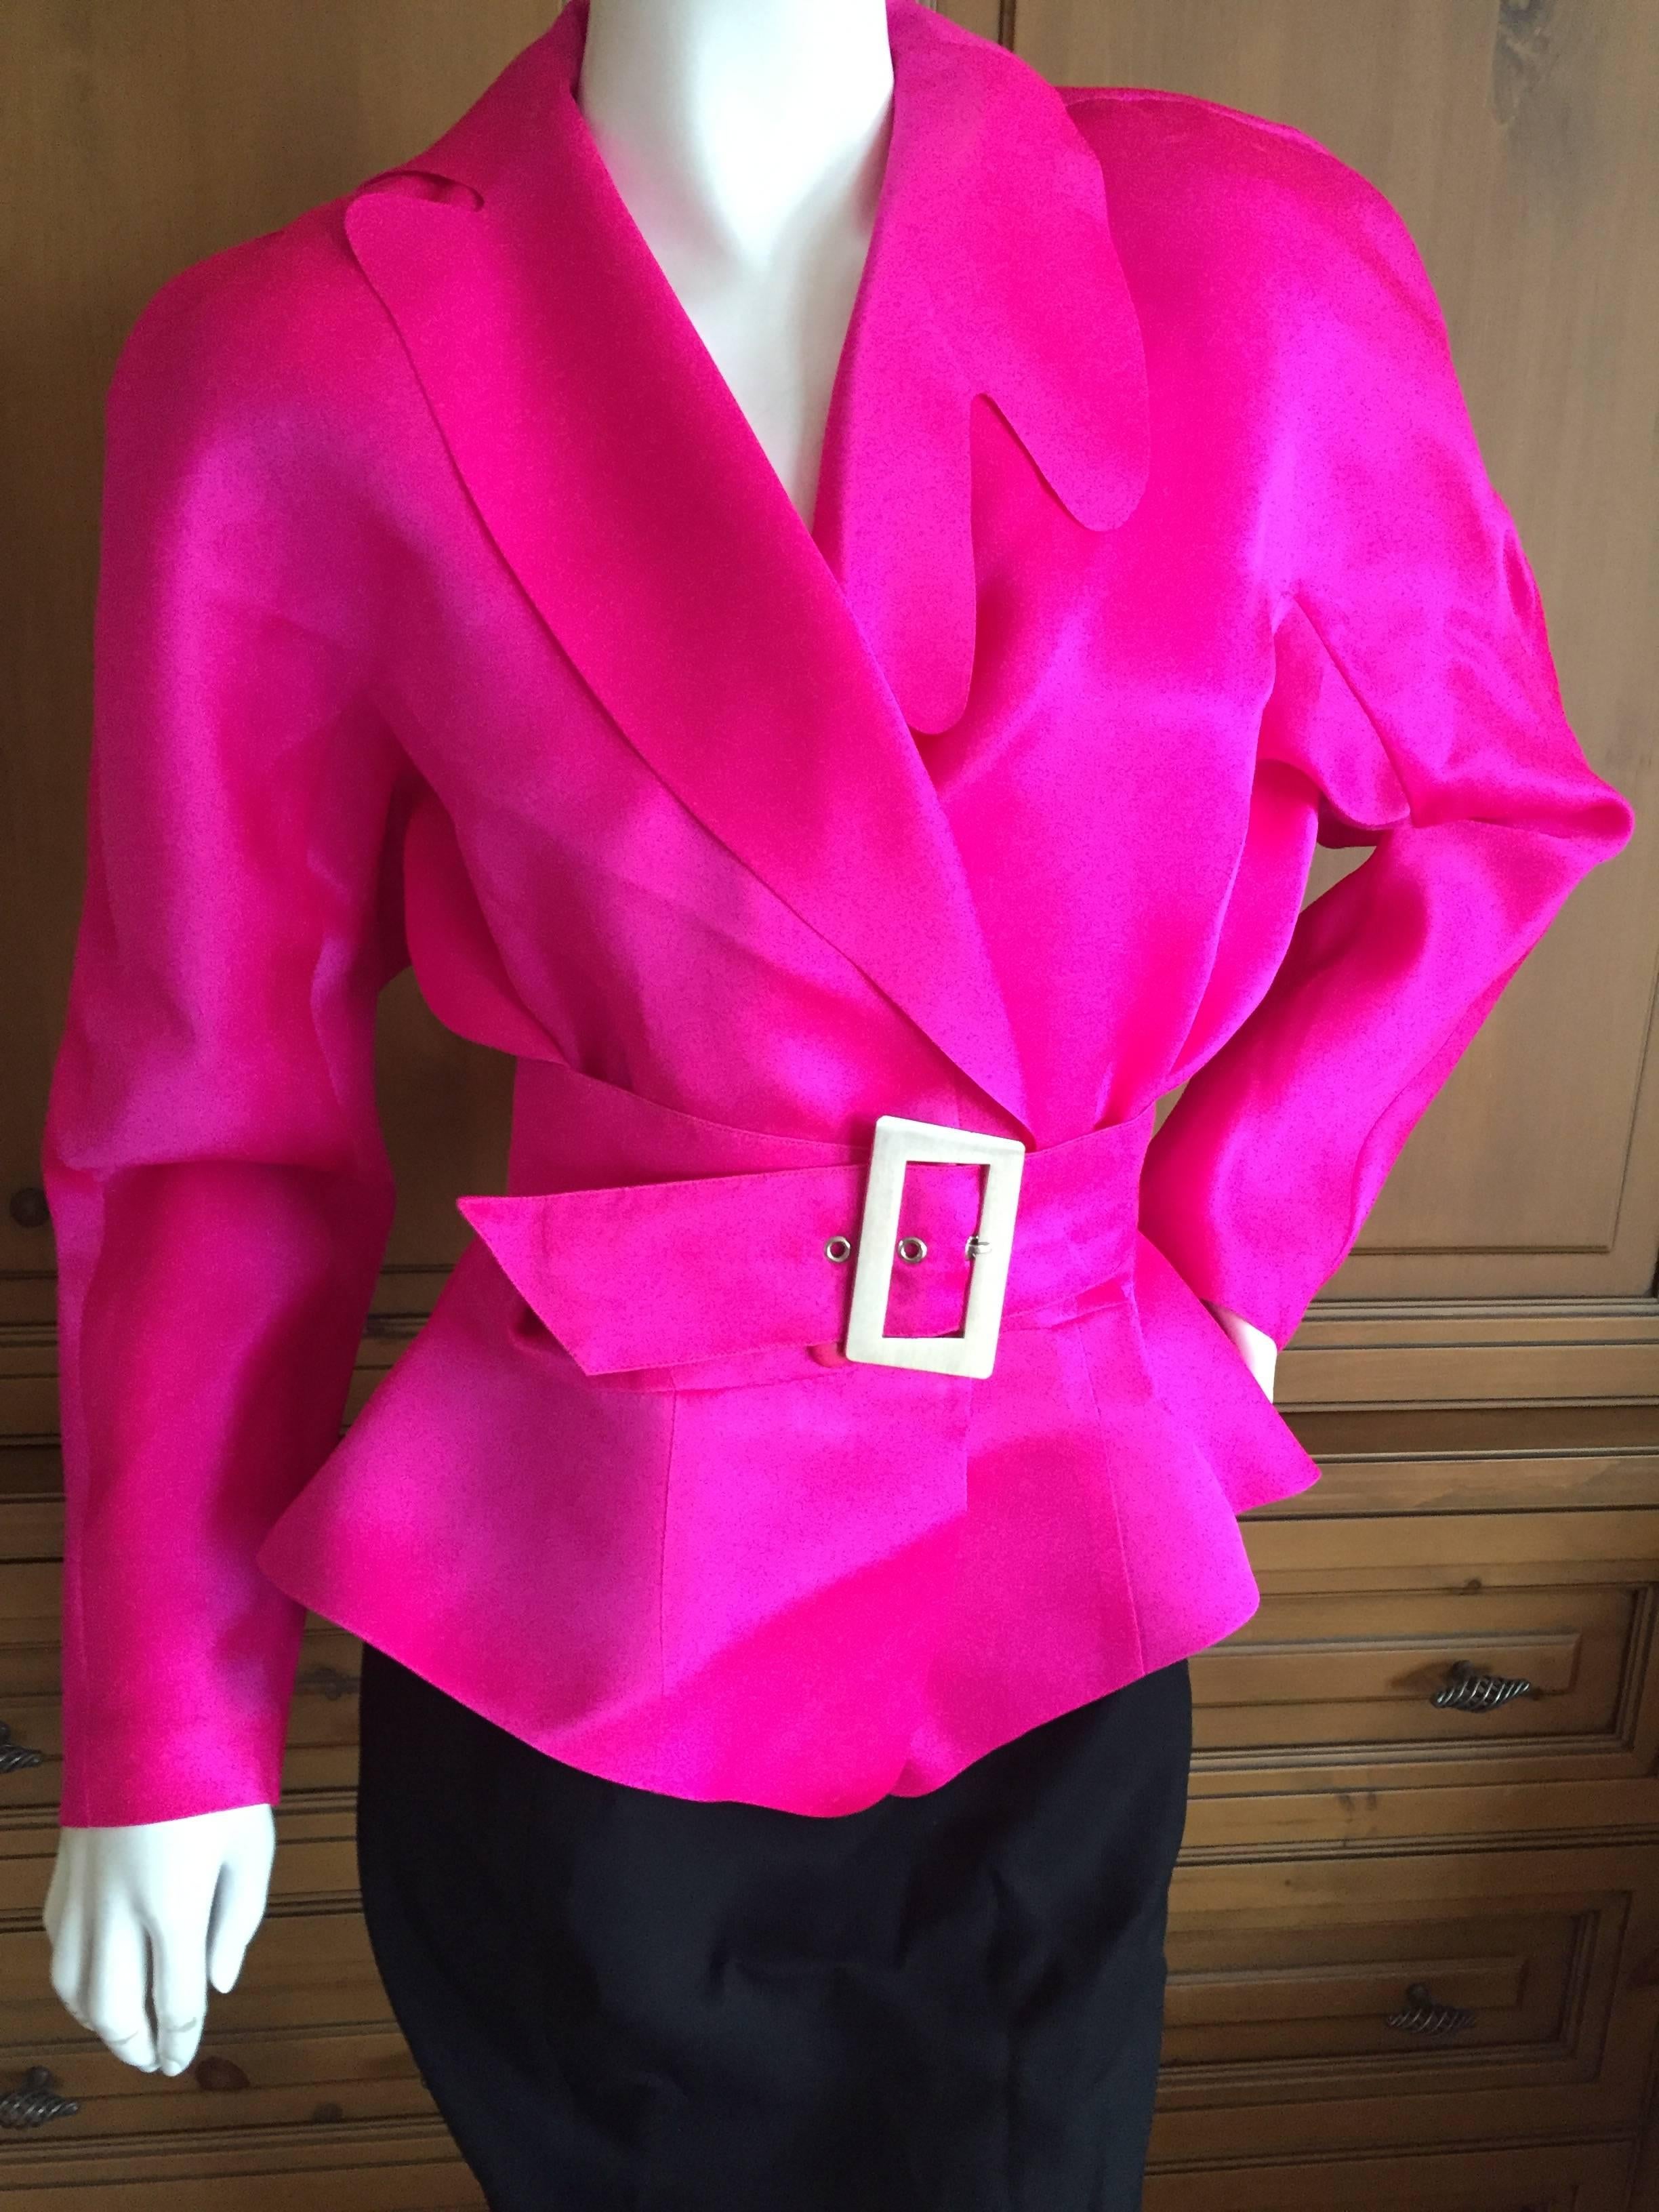 Sensational Thierry Mugler Shocking Pink Silk Suit with Belt.
Black pencil skirt with a silk jacket with a belt. Unlined, I'm not certain if it is a blouse or a jacket.
Jacket 
Bust 44"
Waist 29"
Length 25"
Skirt
Wasit